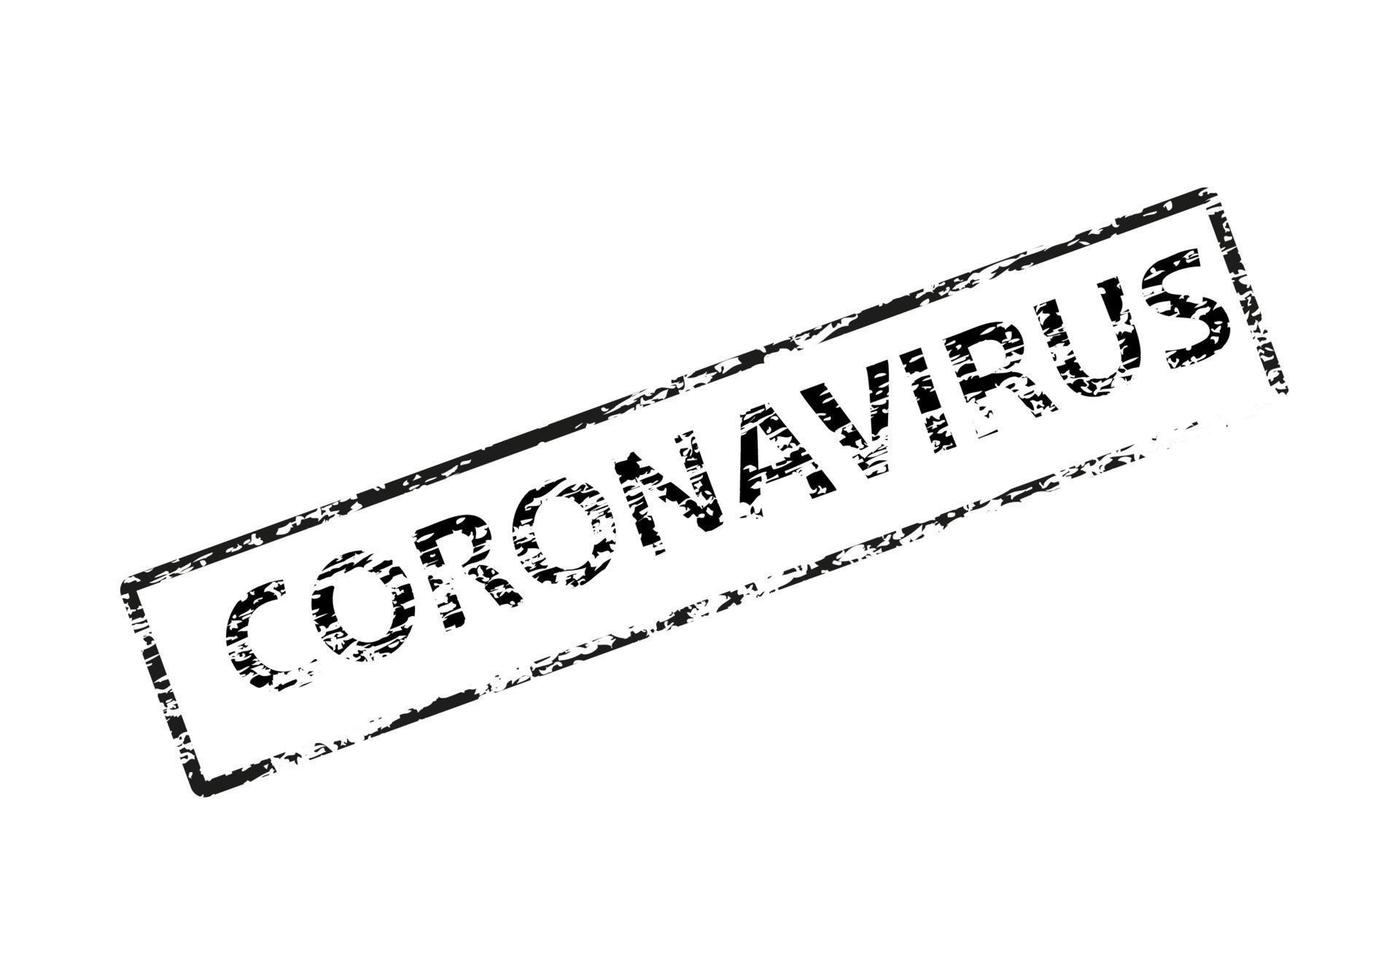 Coronavirus word in red square with grungy texture. Distressed rubber stamp vector illustration on white background. COVID or 2019-nCoV pandemic spread.